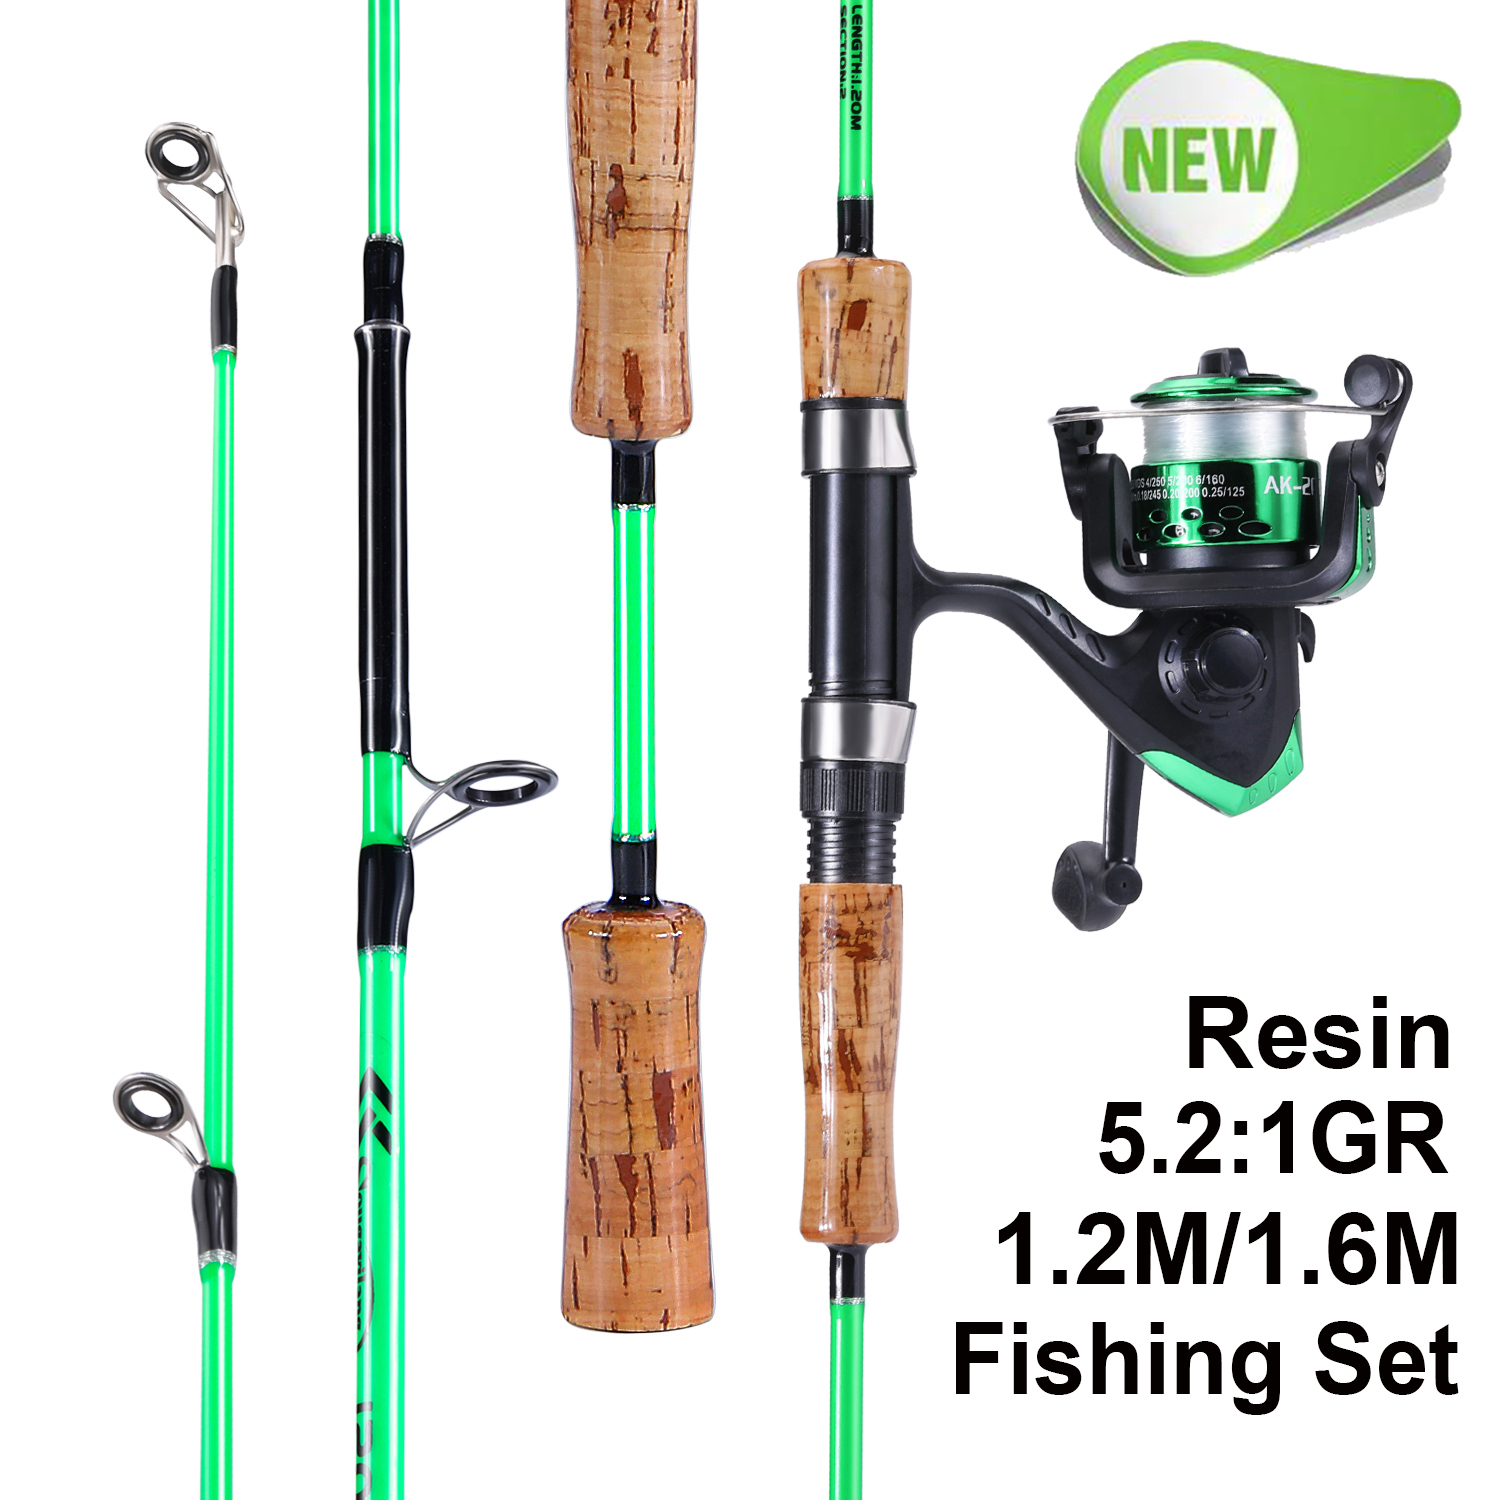 Fast Shipping】 Portable 1.8m Telescopic Fishing Rod 5.5:1 Gear Ratio Spinning  Fishing Reel Set with Fishing Line Fishing Gear Rod Combo CYB-Fishing-Rod- Kit